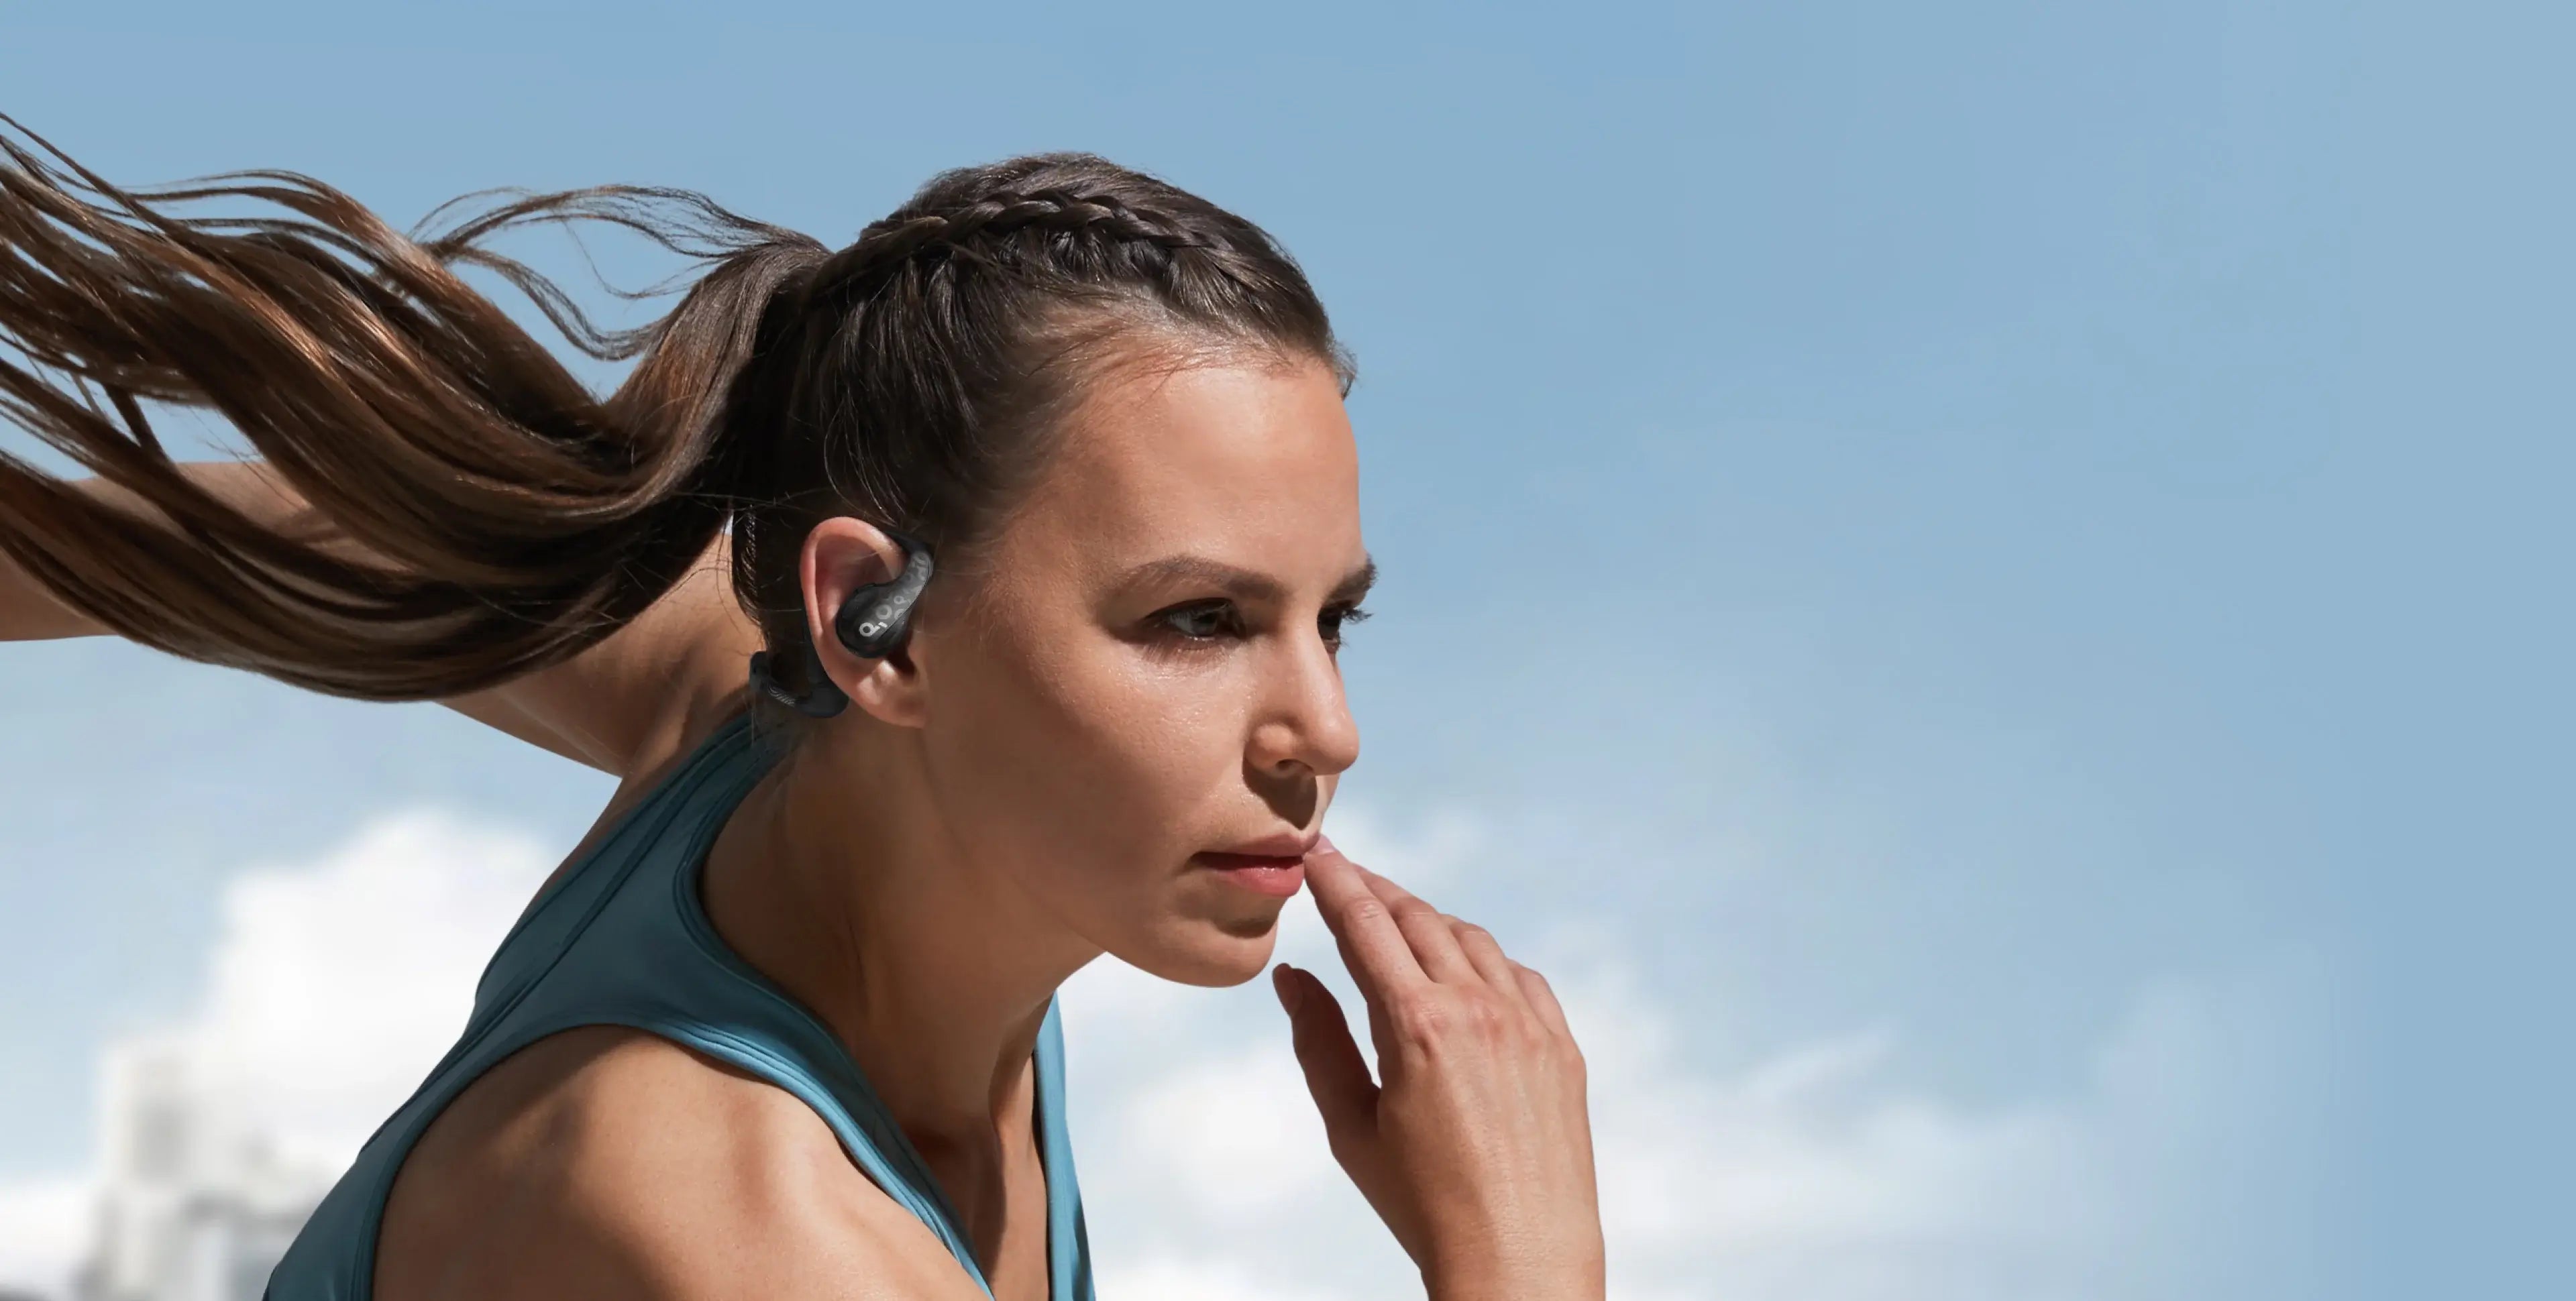 Are Bone-Conduction Headphones Safe? What You Need to Know